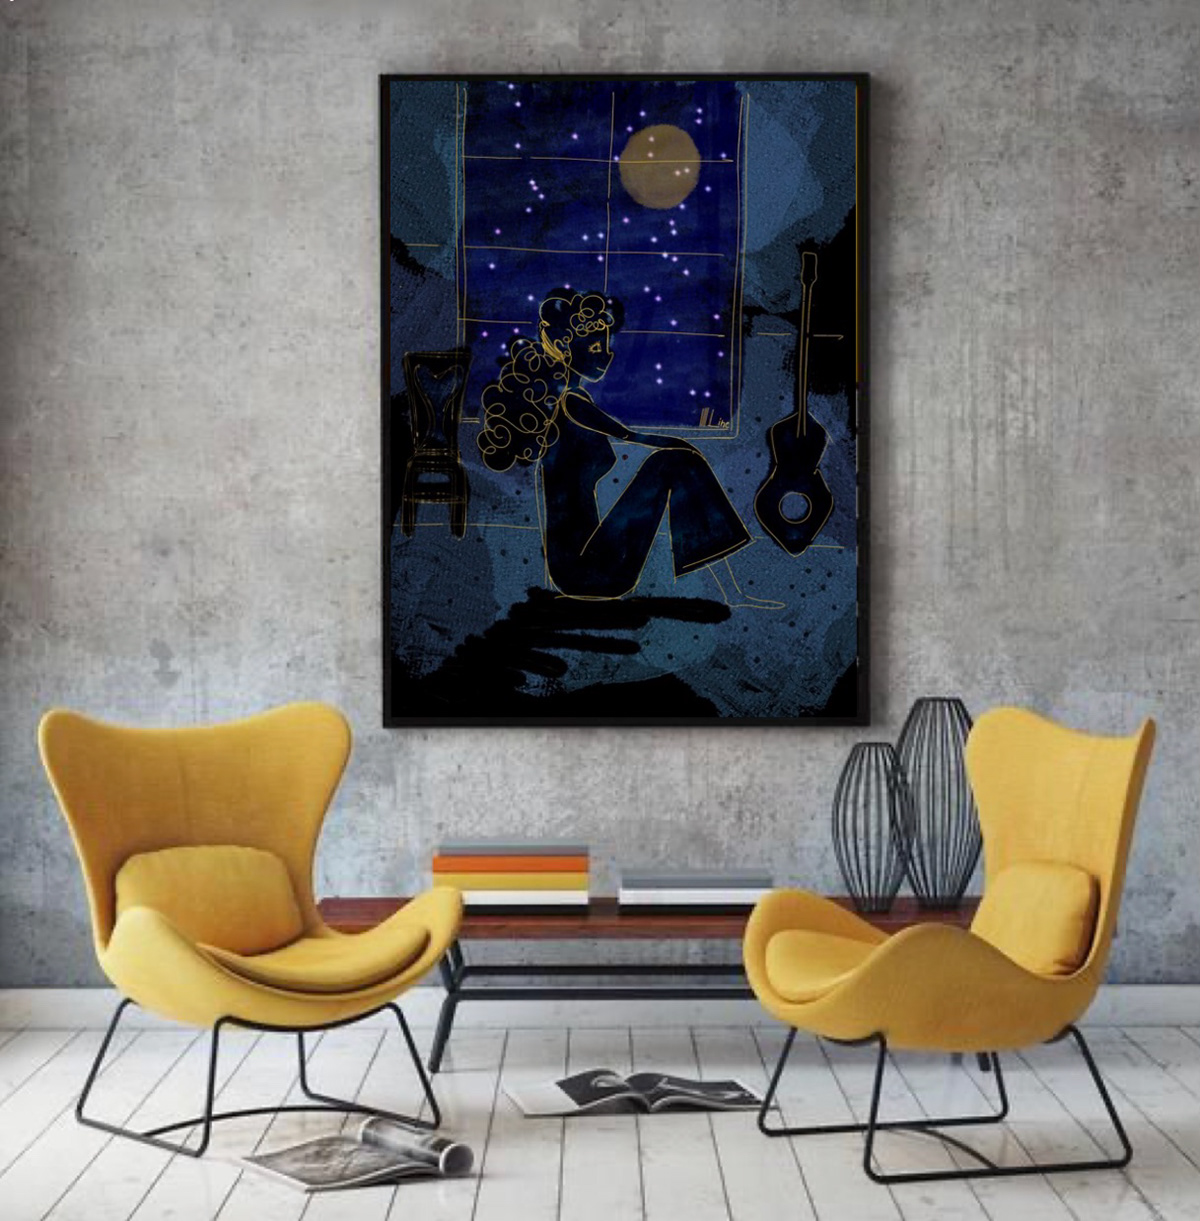 kid wine alone Mad angry moon cozy elephants lasers Thinking owl trapped abstract town Greece woman child